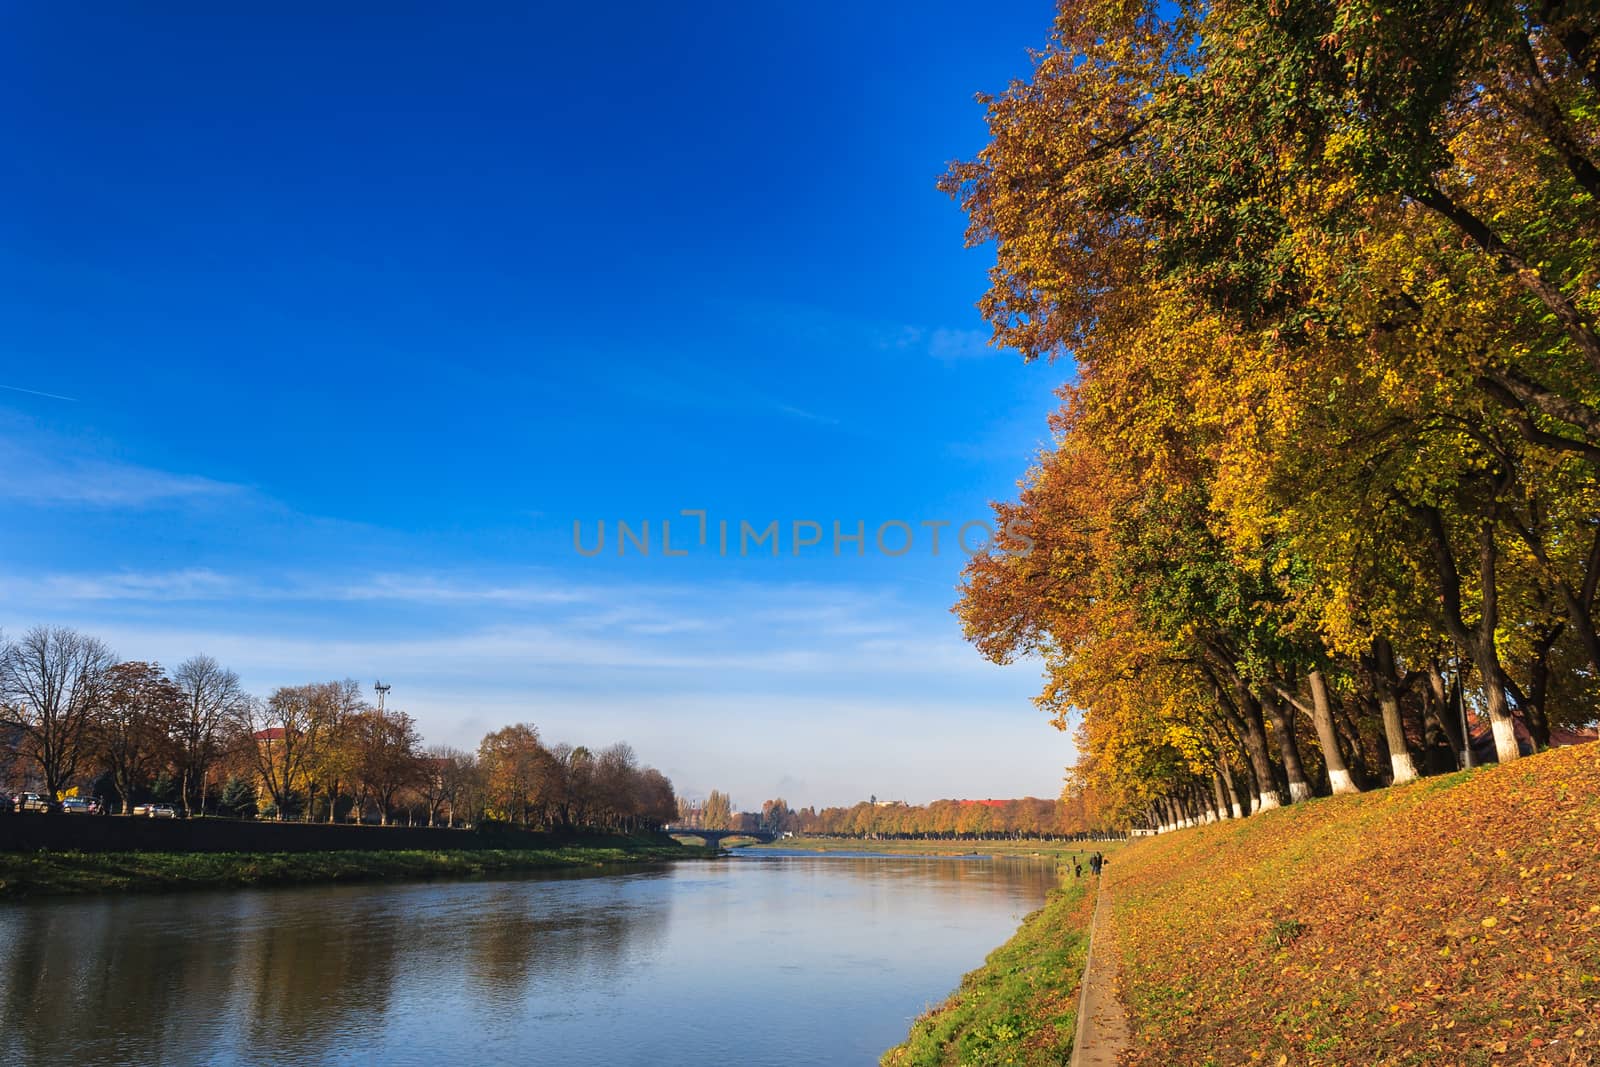 yellow autumn foliage on the embankment and the clear blue sky reflected in the river horizontal